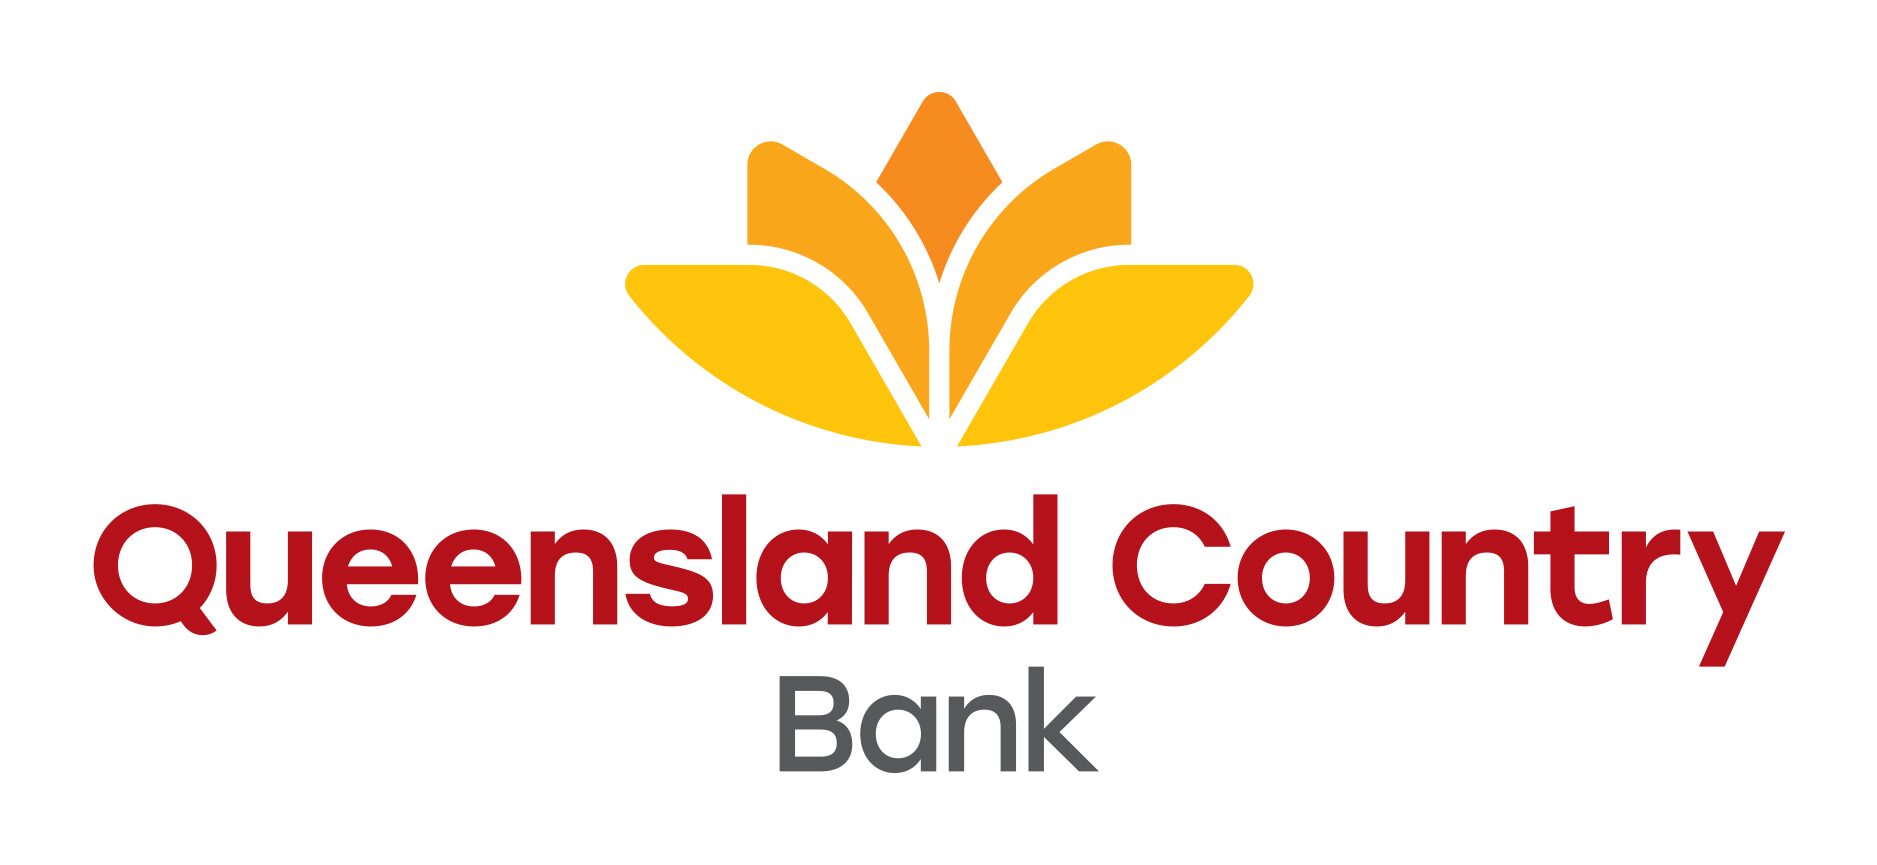 competition queensland country bank logo